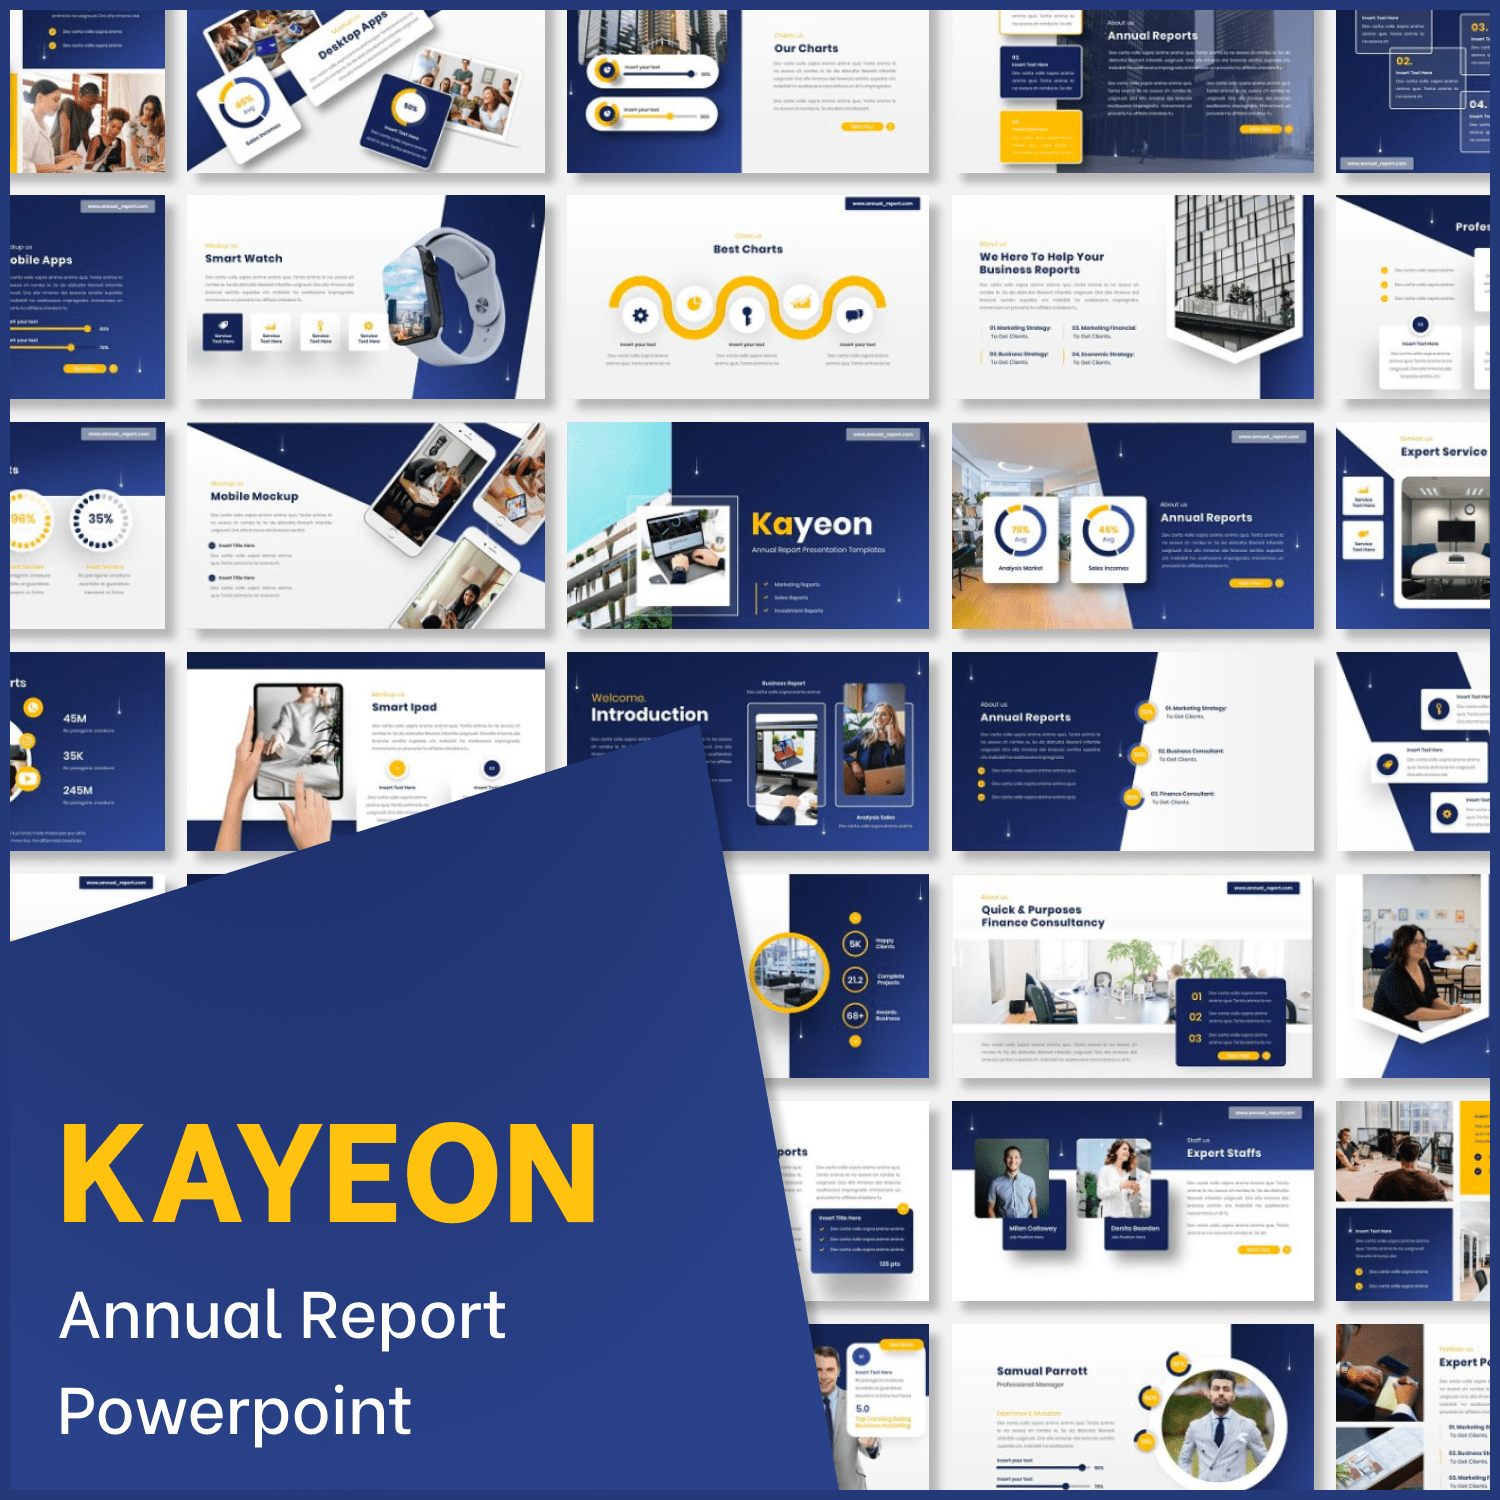 Kayeon - Annual Report Powerpoint main cover.